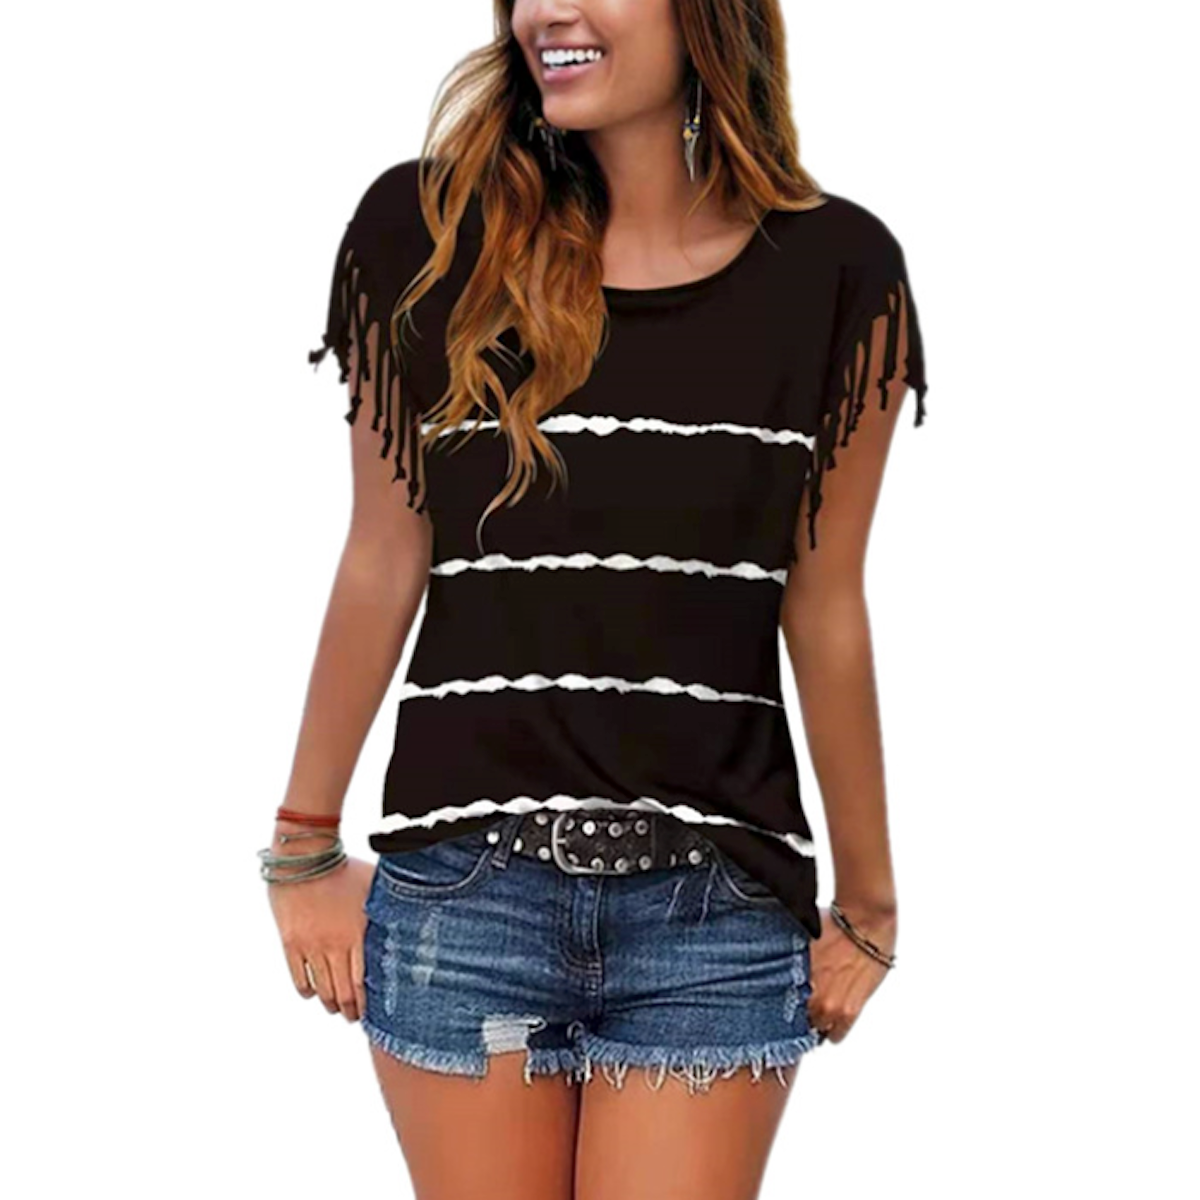 Womens Striped T-Shirt with Fringe